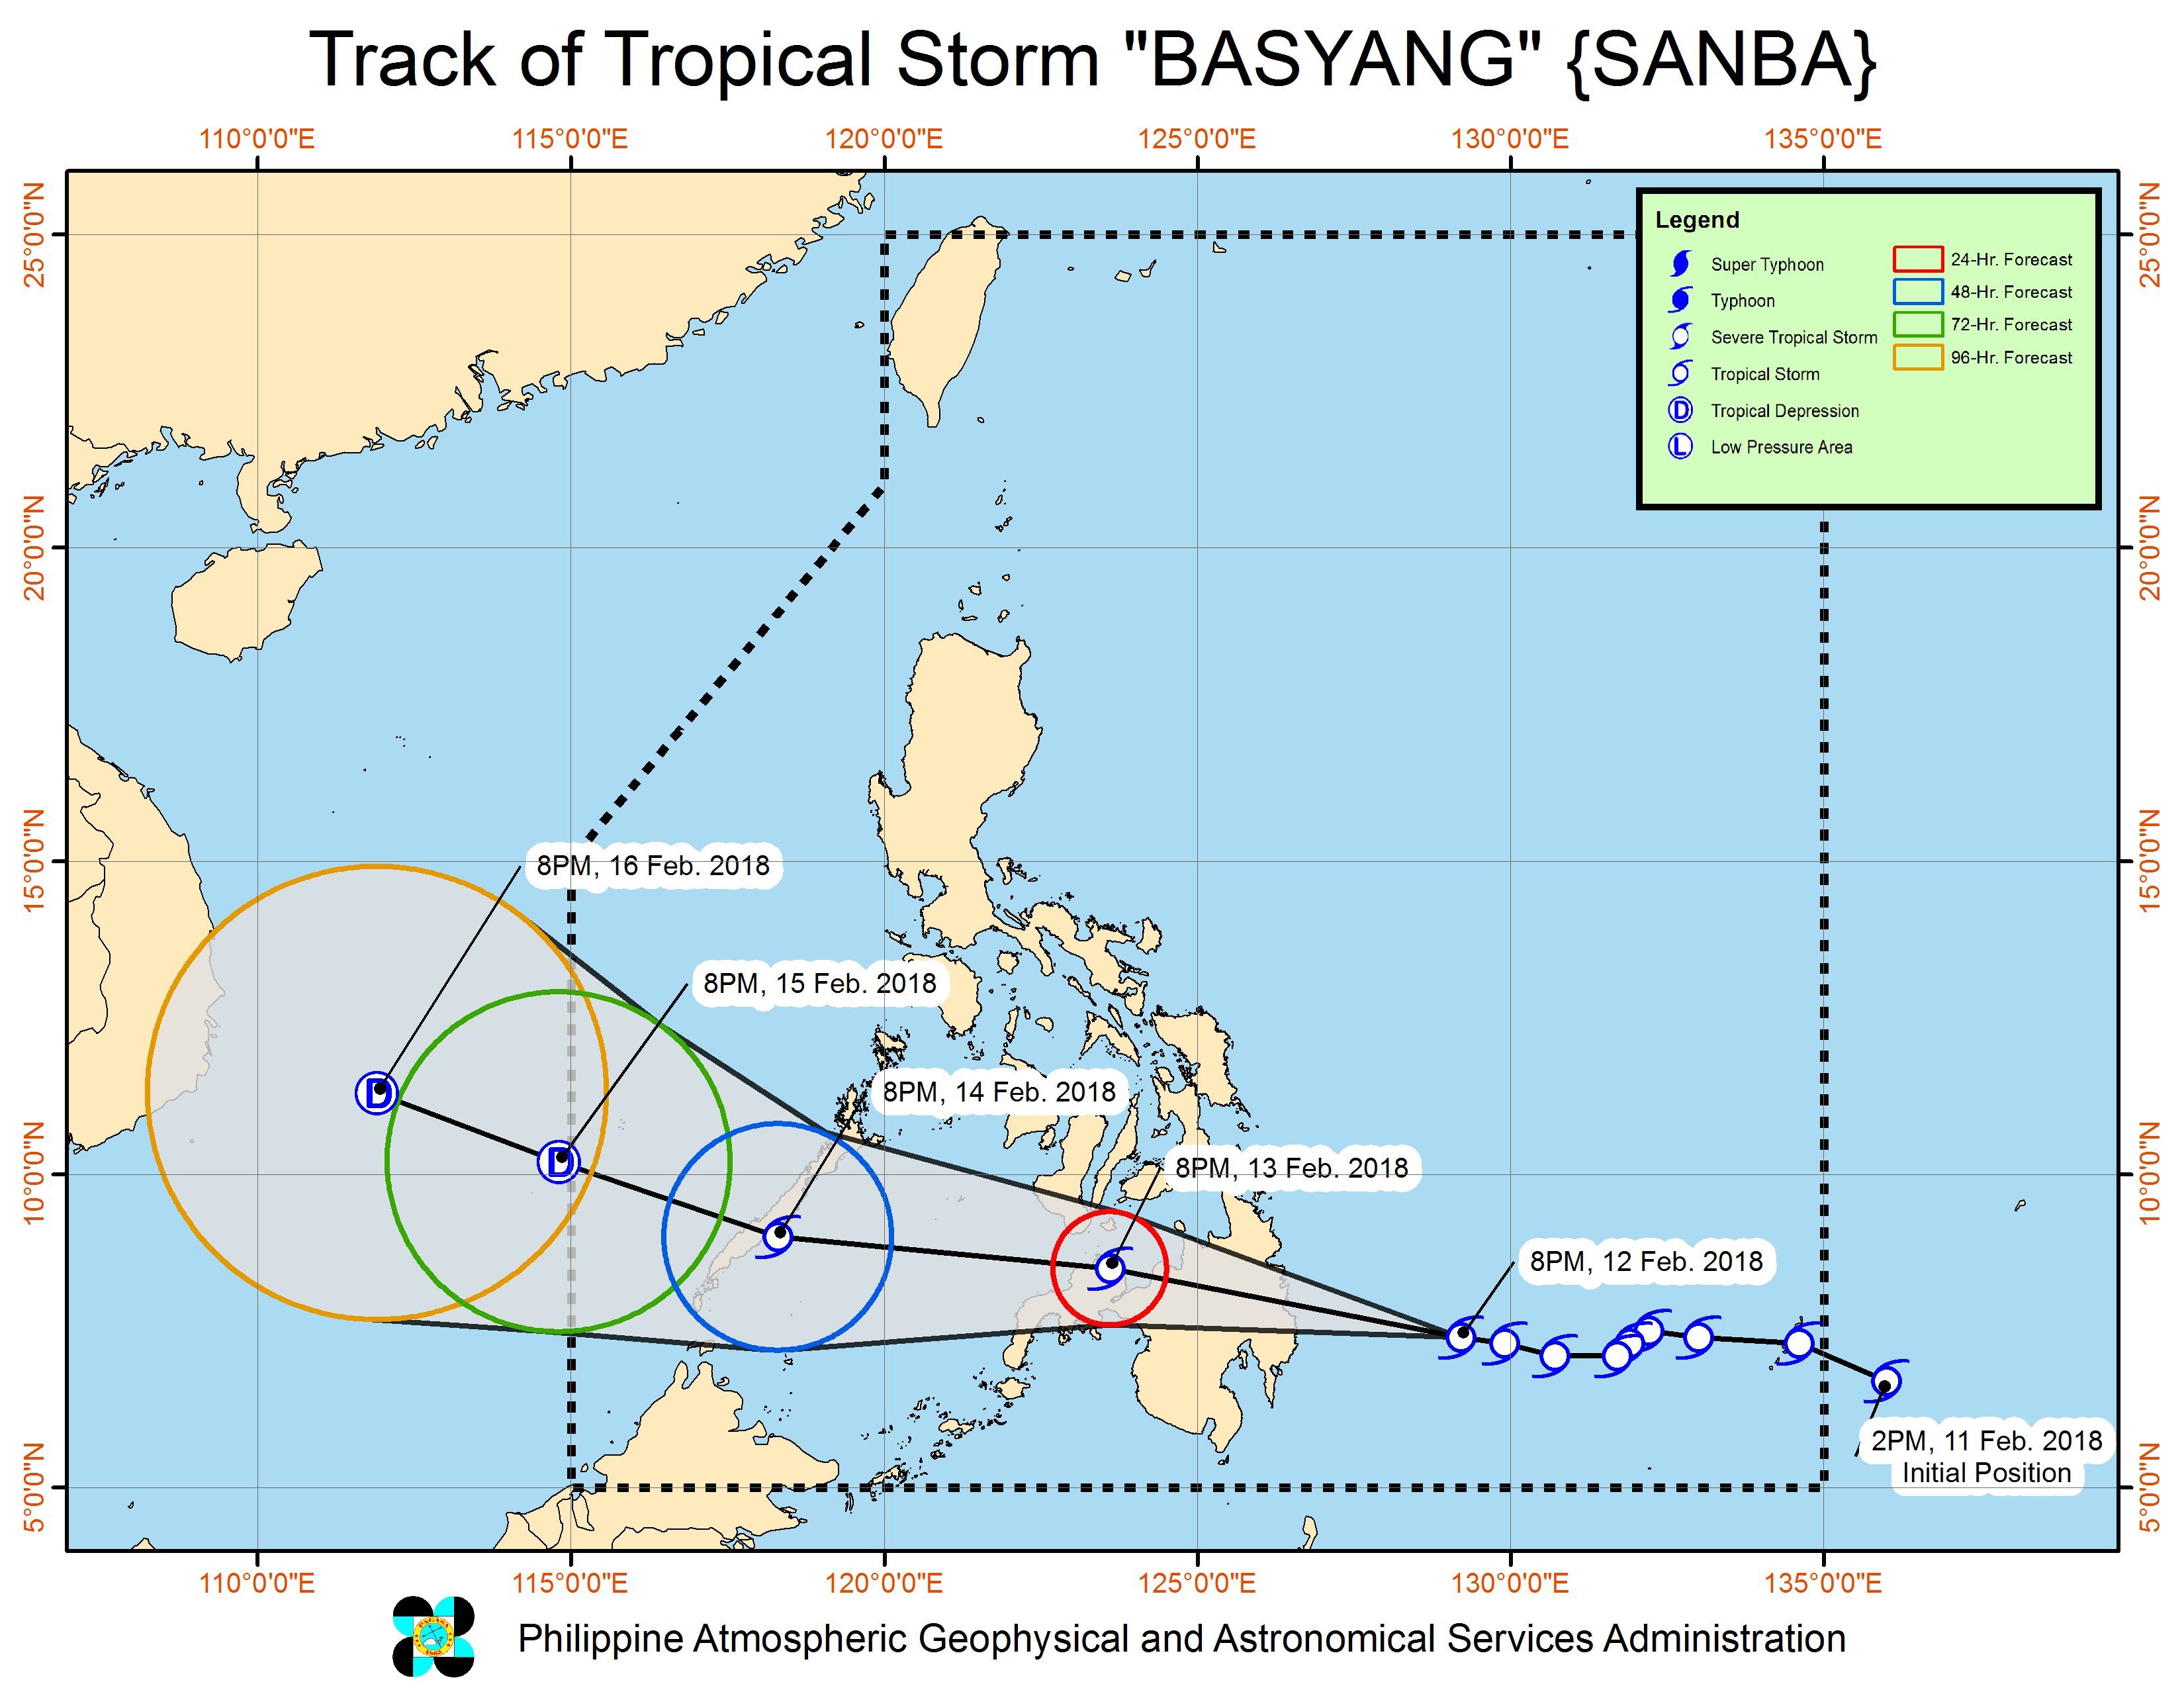 Forecast track of Tropical Storm Basyang as of February 12, 11 pm. Image courtesy of PAGASA 